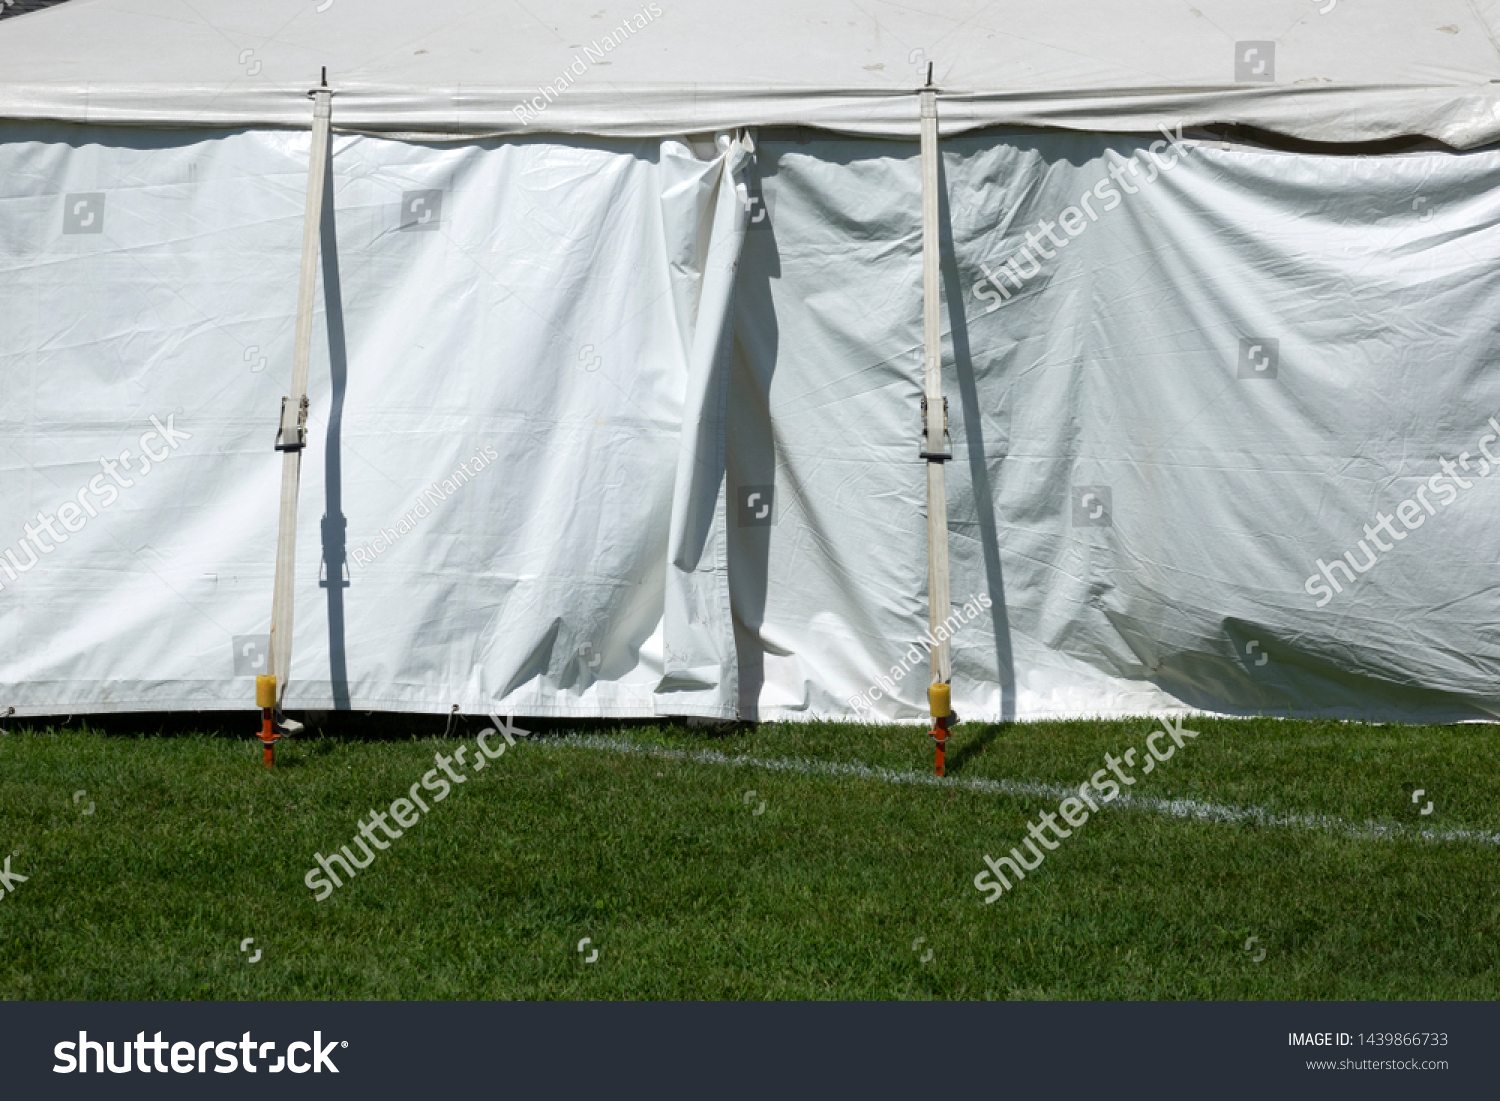 Binders for big circus tents #1439866733